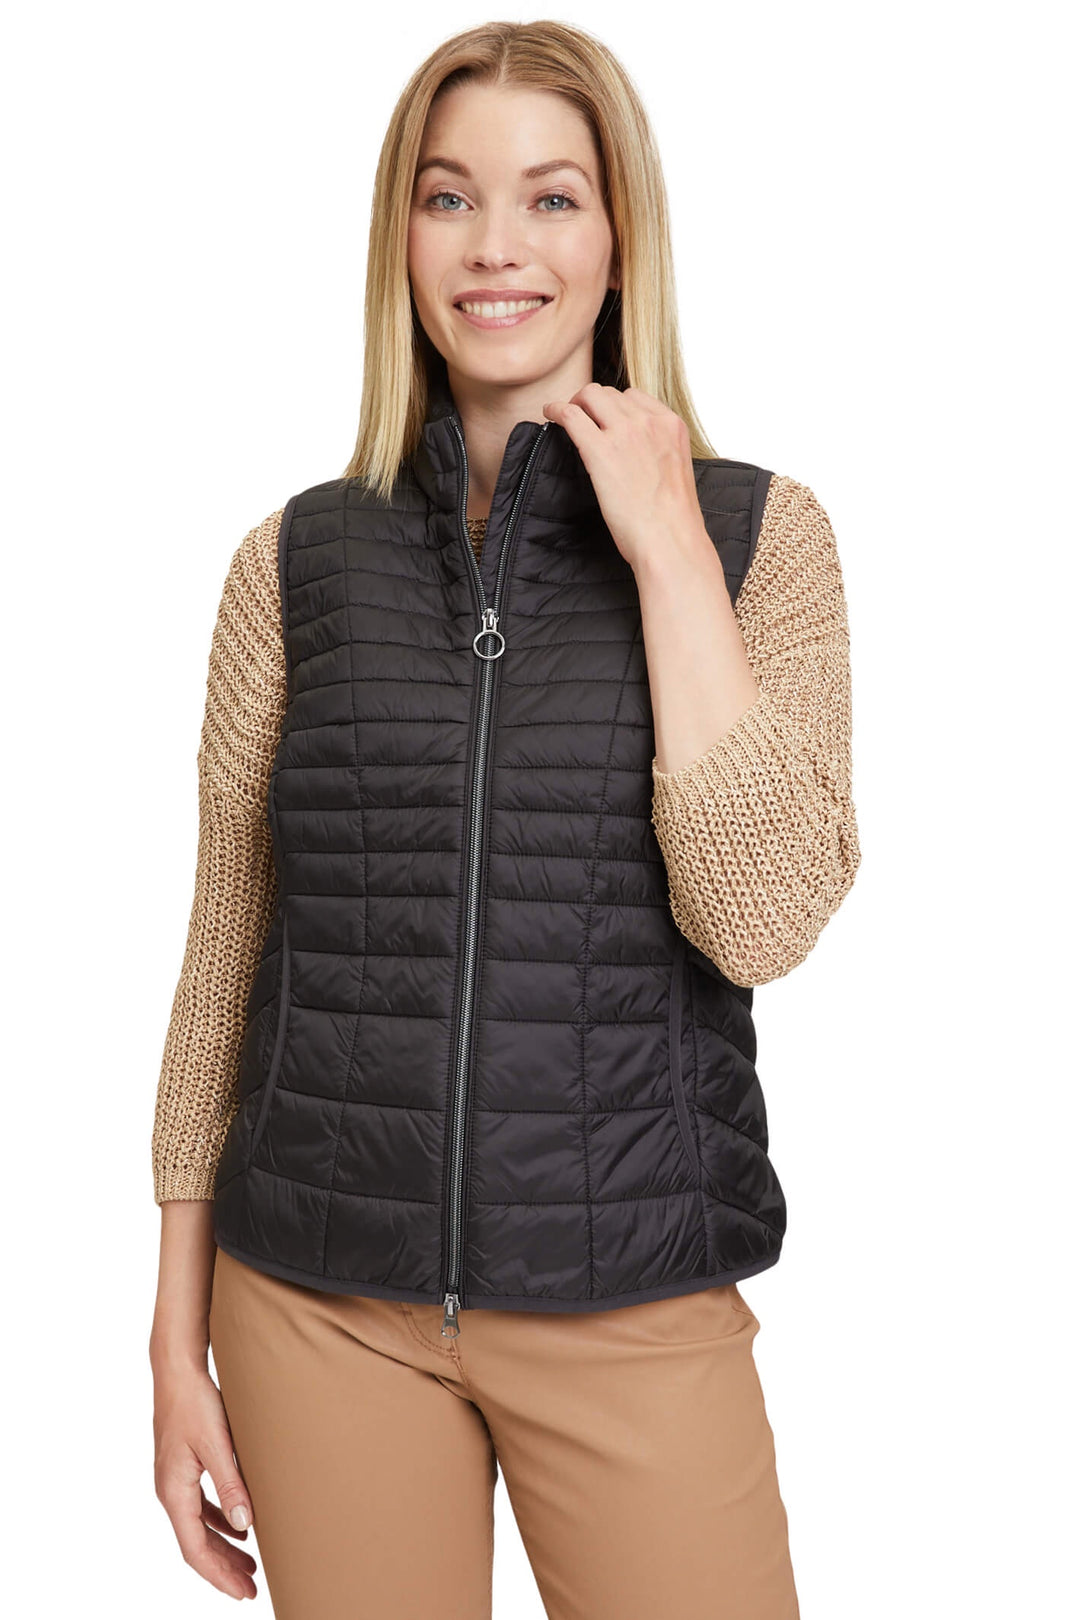 Betty Barclay 7195 1902 9045 Black Padded Gilet - Dotique Chestefield